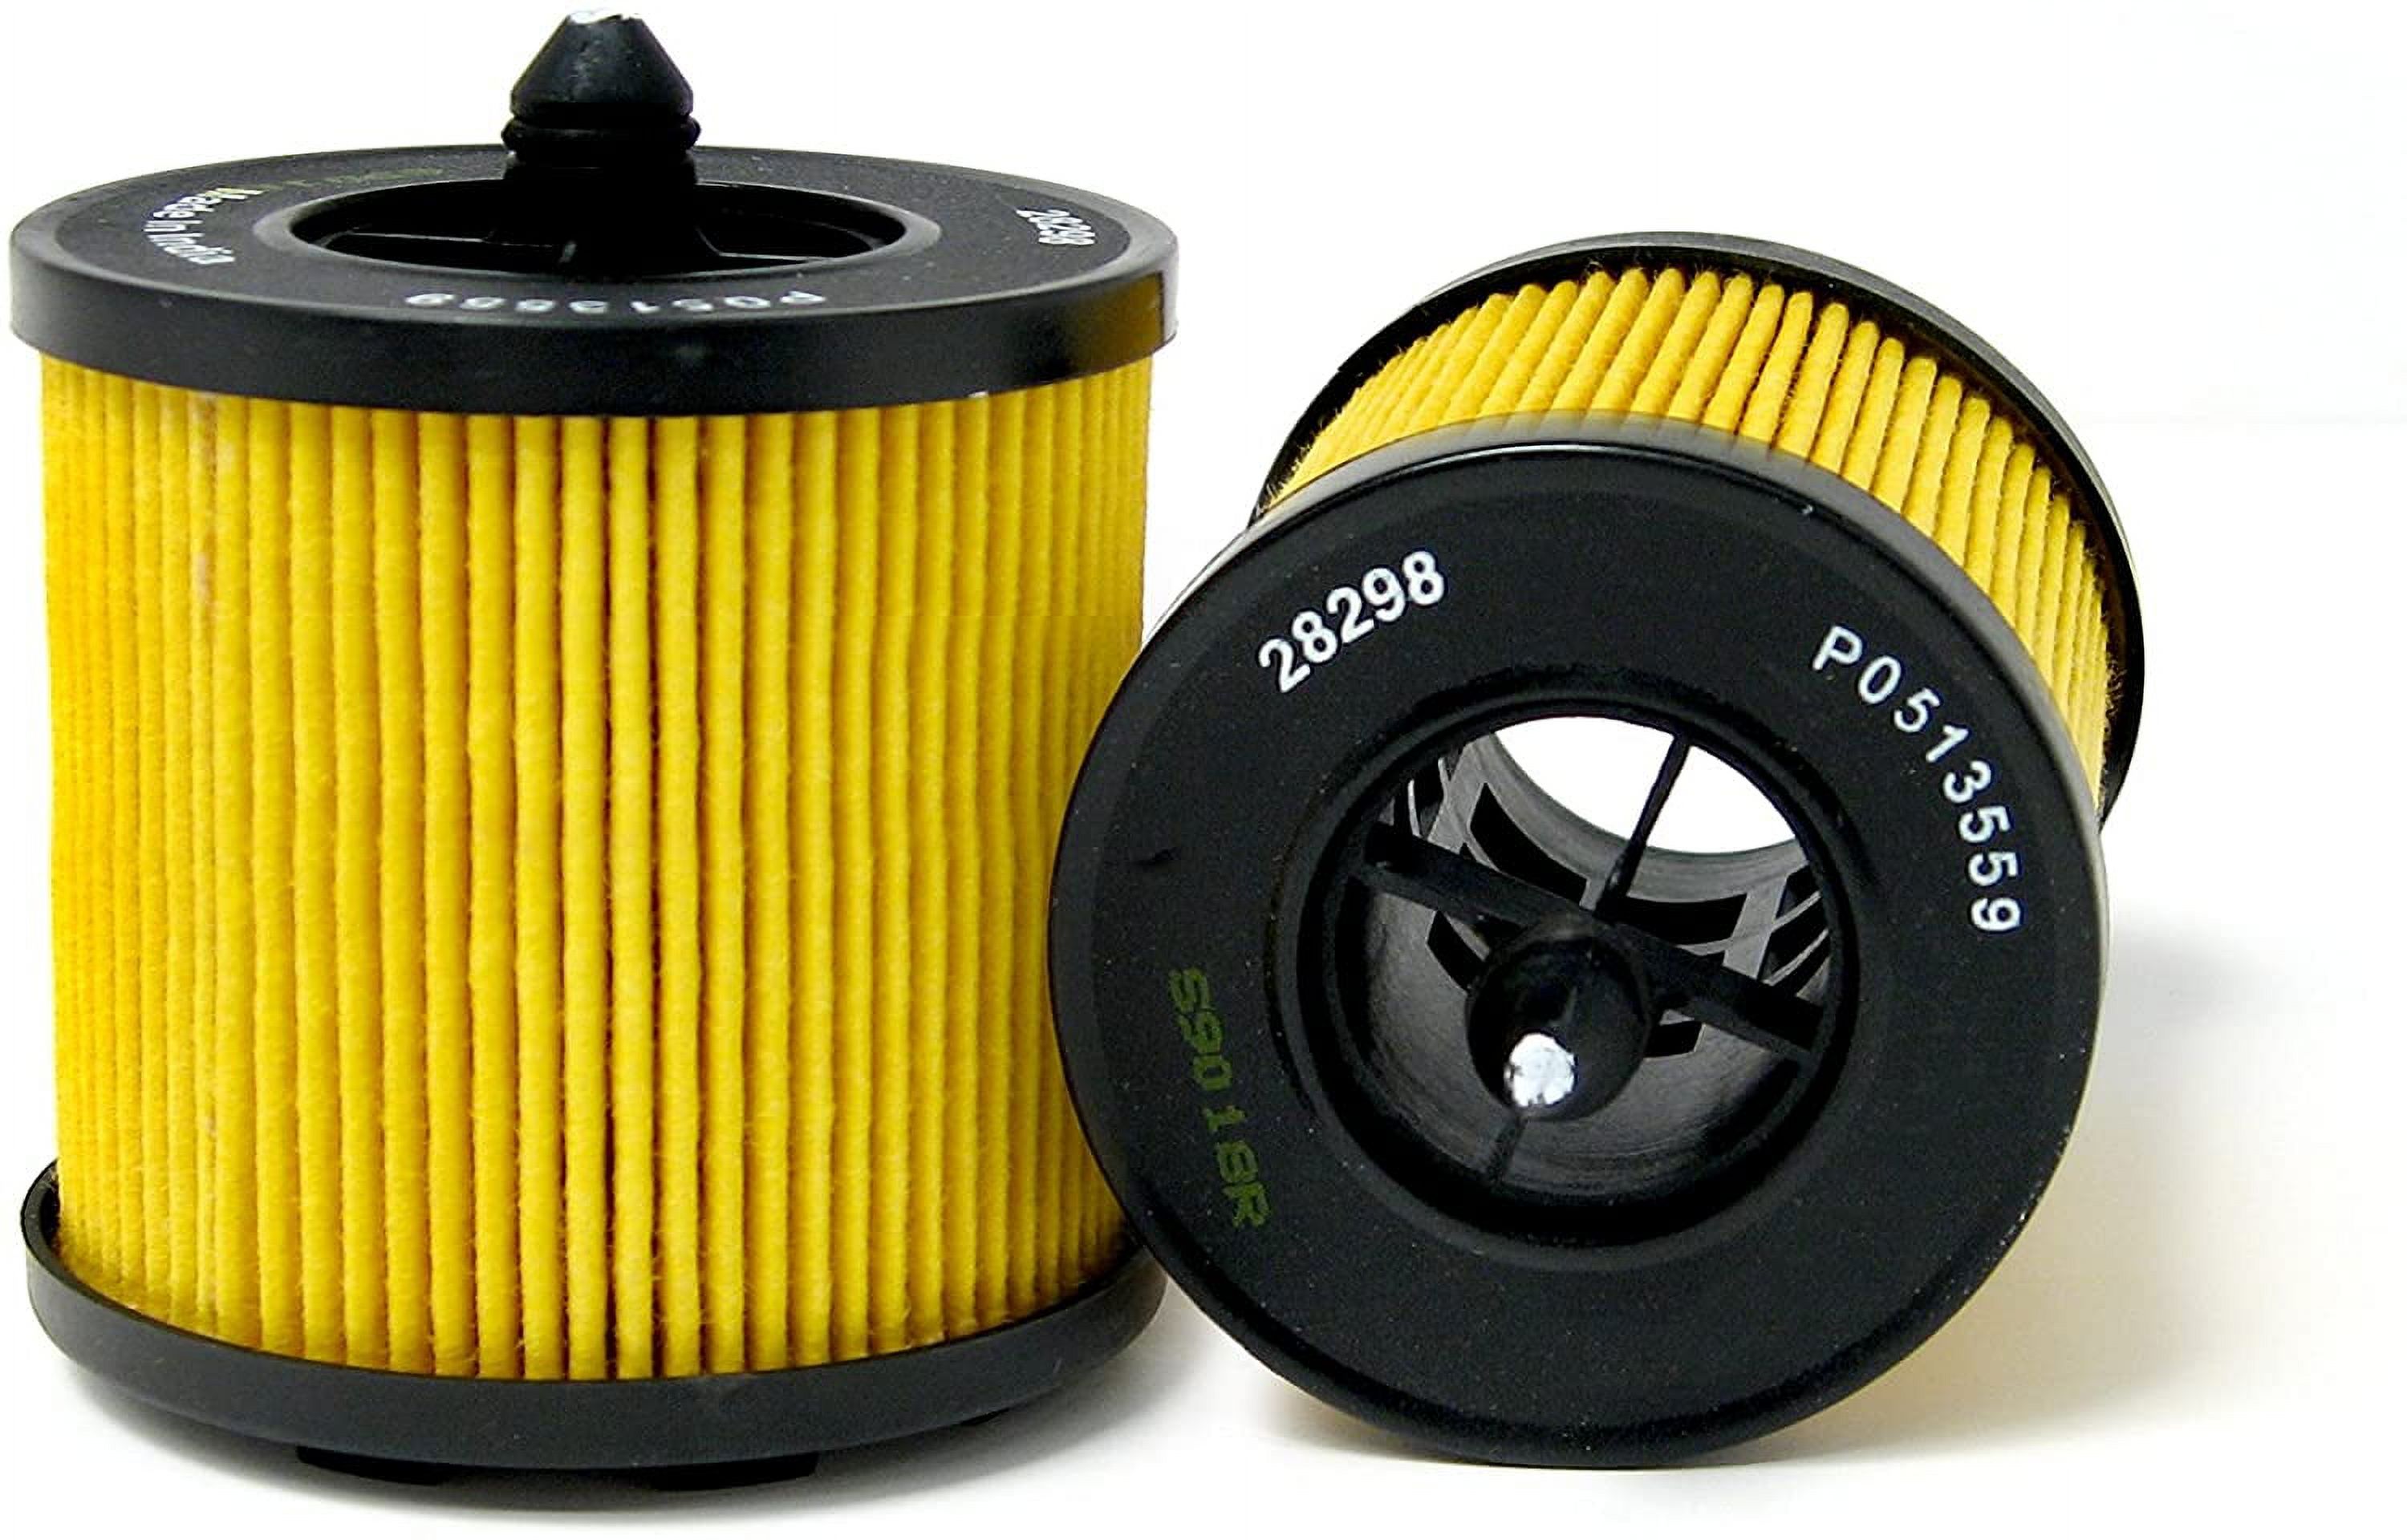 ACDelco Original Equipment PF457G Professional Engine Oil Filter Height 3.8" Width 2.6" Length 2.6" - image 1 of 2